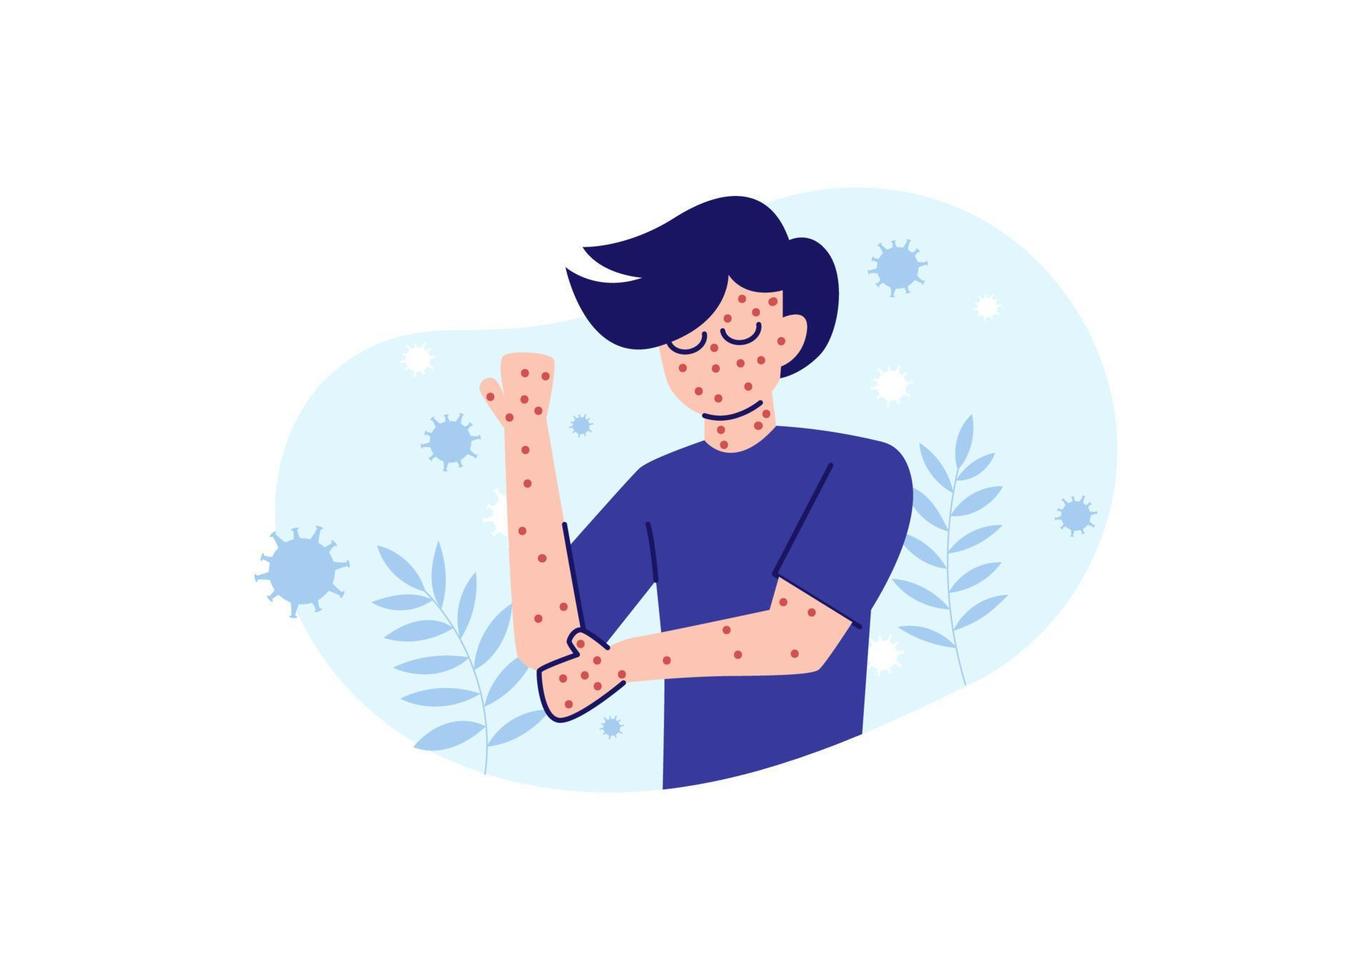 Monkeypox or Monkey Pox Symptoms Flat Illustration Vector Isolated. A man scratching his hand because of monkeypox symptoms.